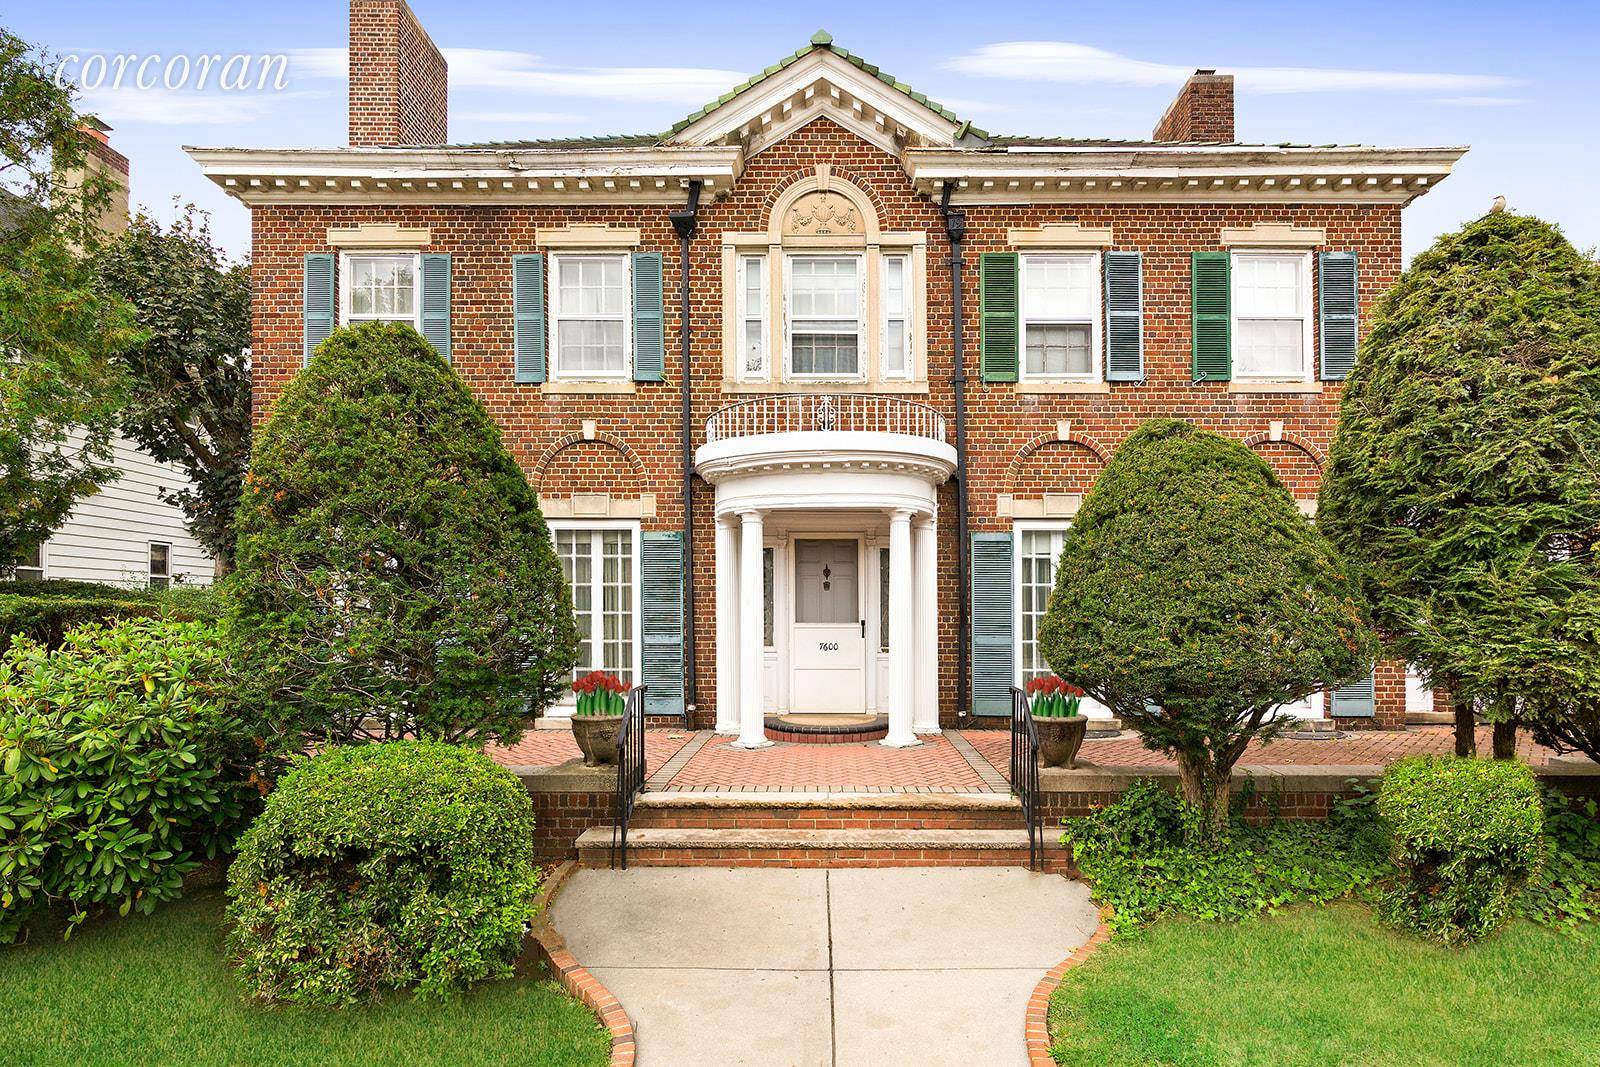 7600 Ridge Boulevard This exceptional Federal style mansion in the heart of Bay Ridge, Brooklyn will leave you breathless.